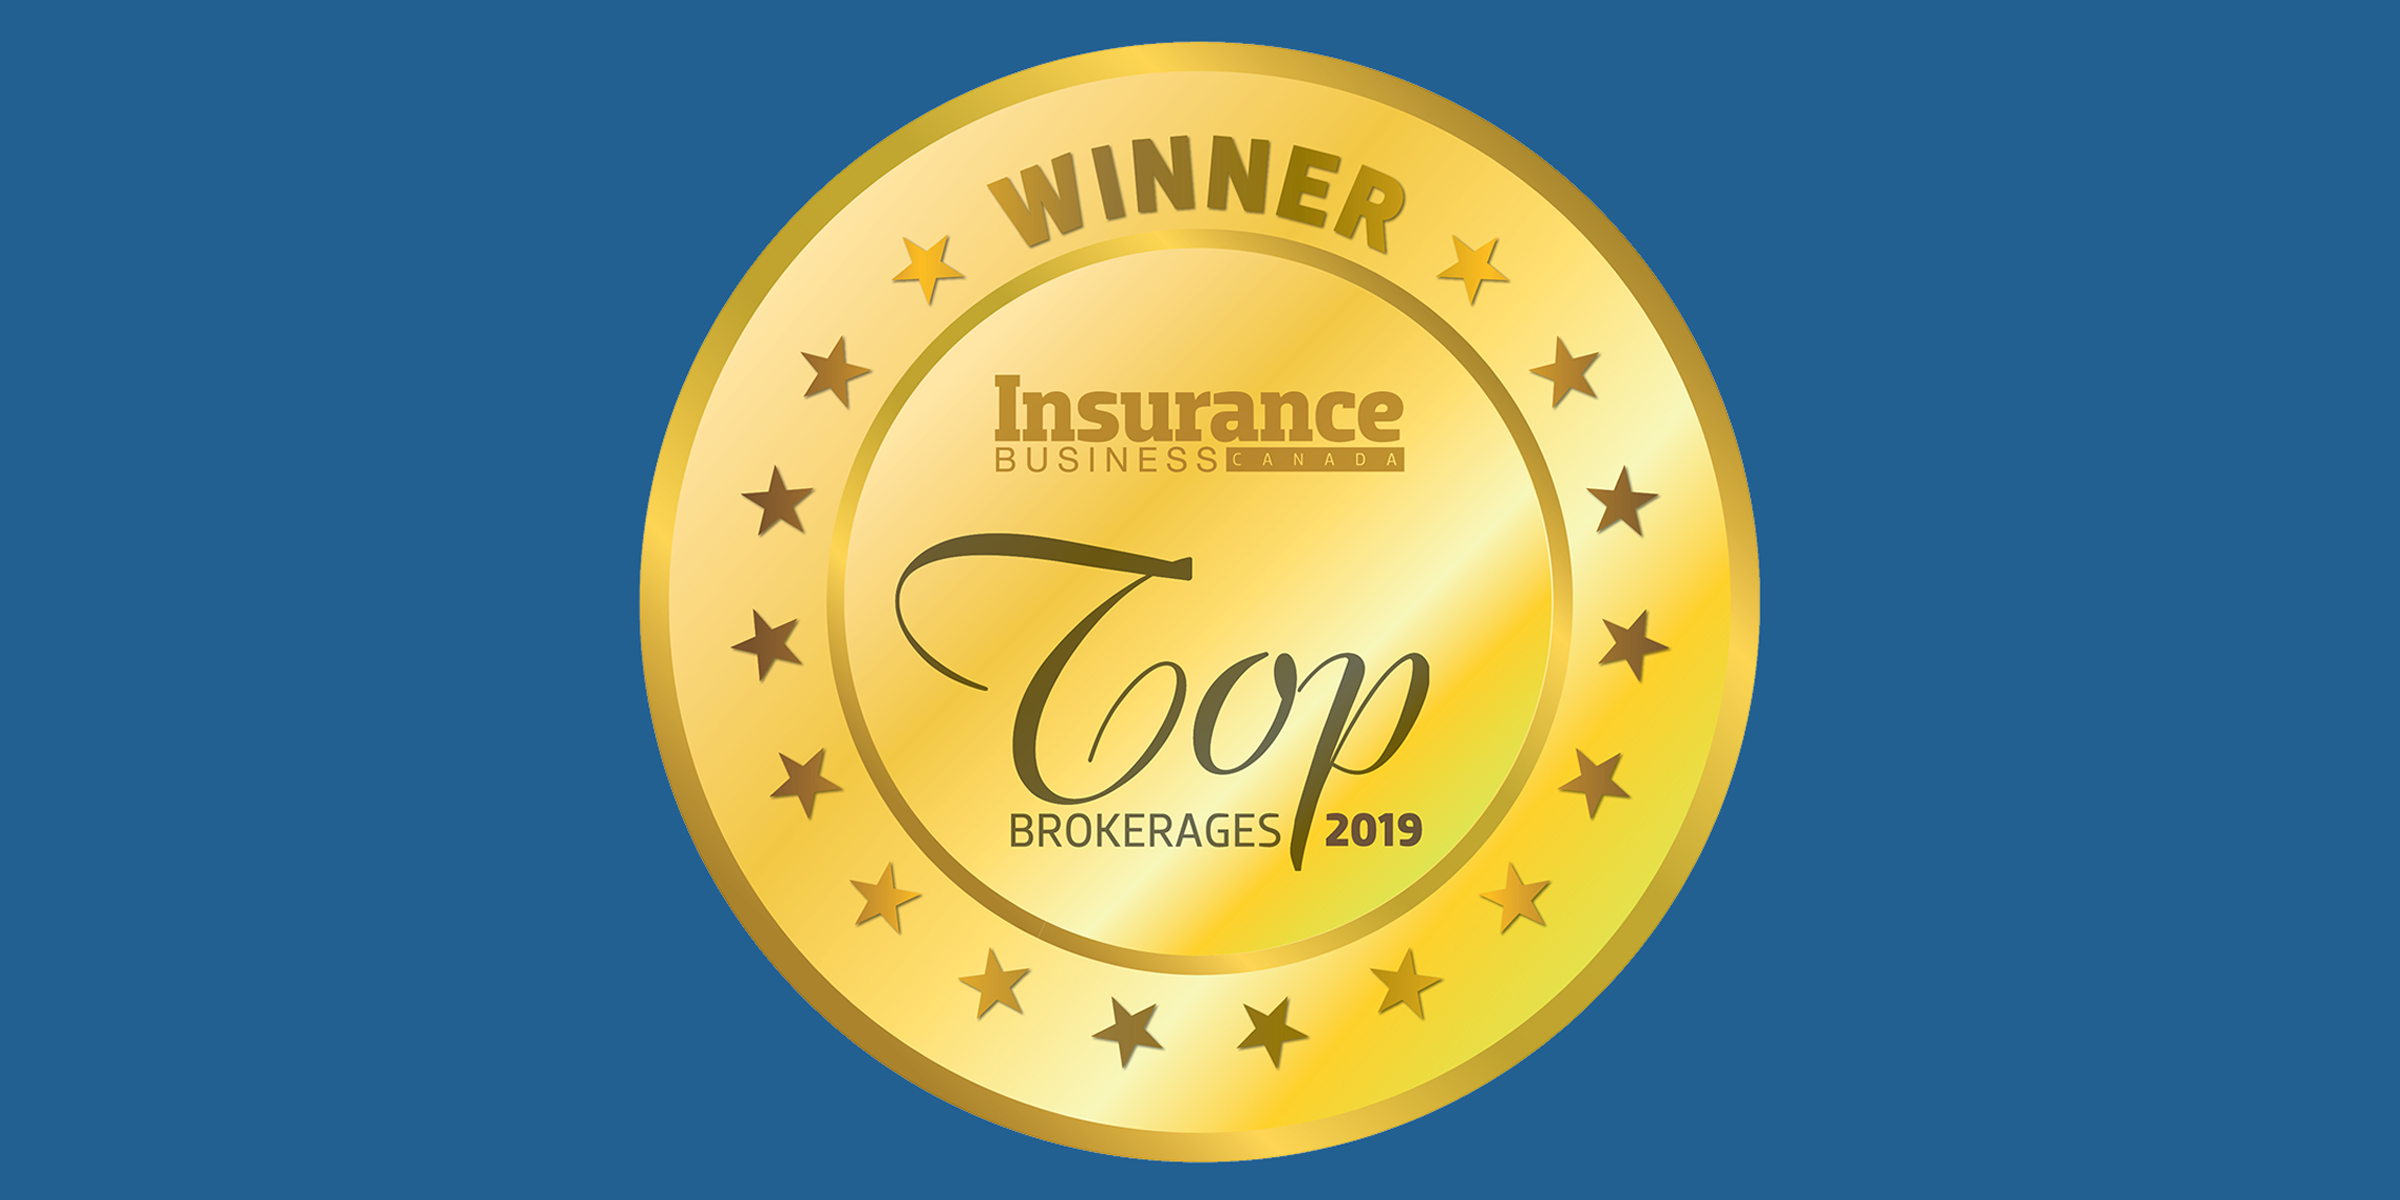 Storm Insurance Group Ranked #2 in 2019 Top 10 Canadian Brokerages Awards